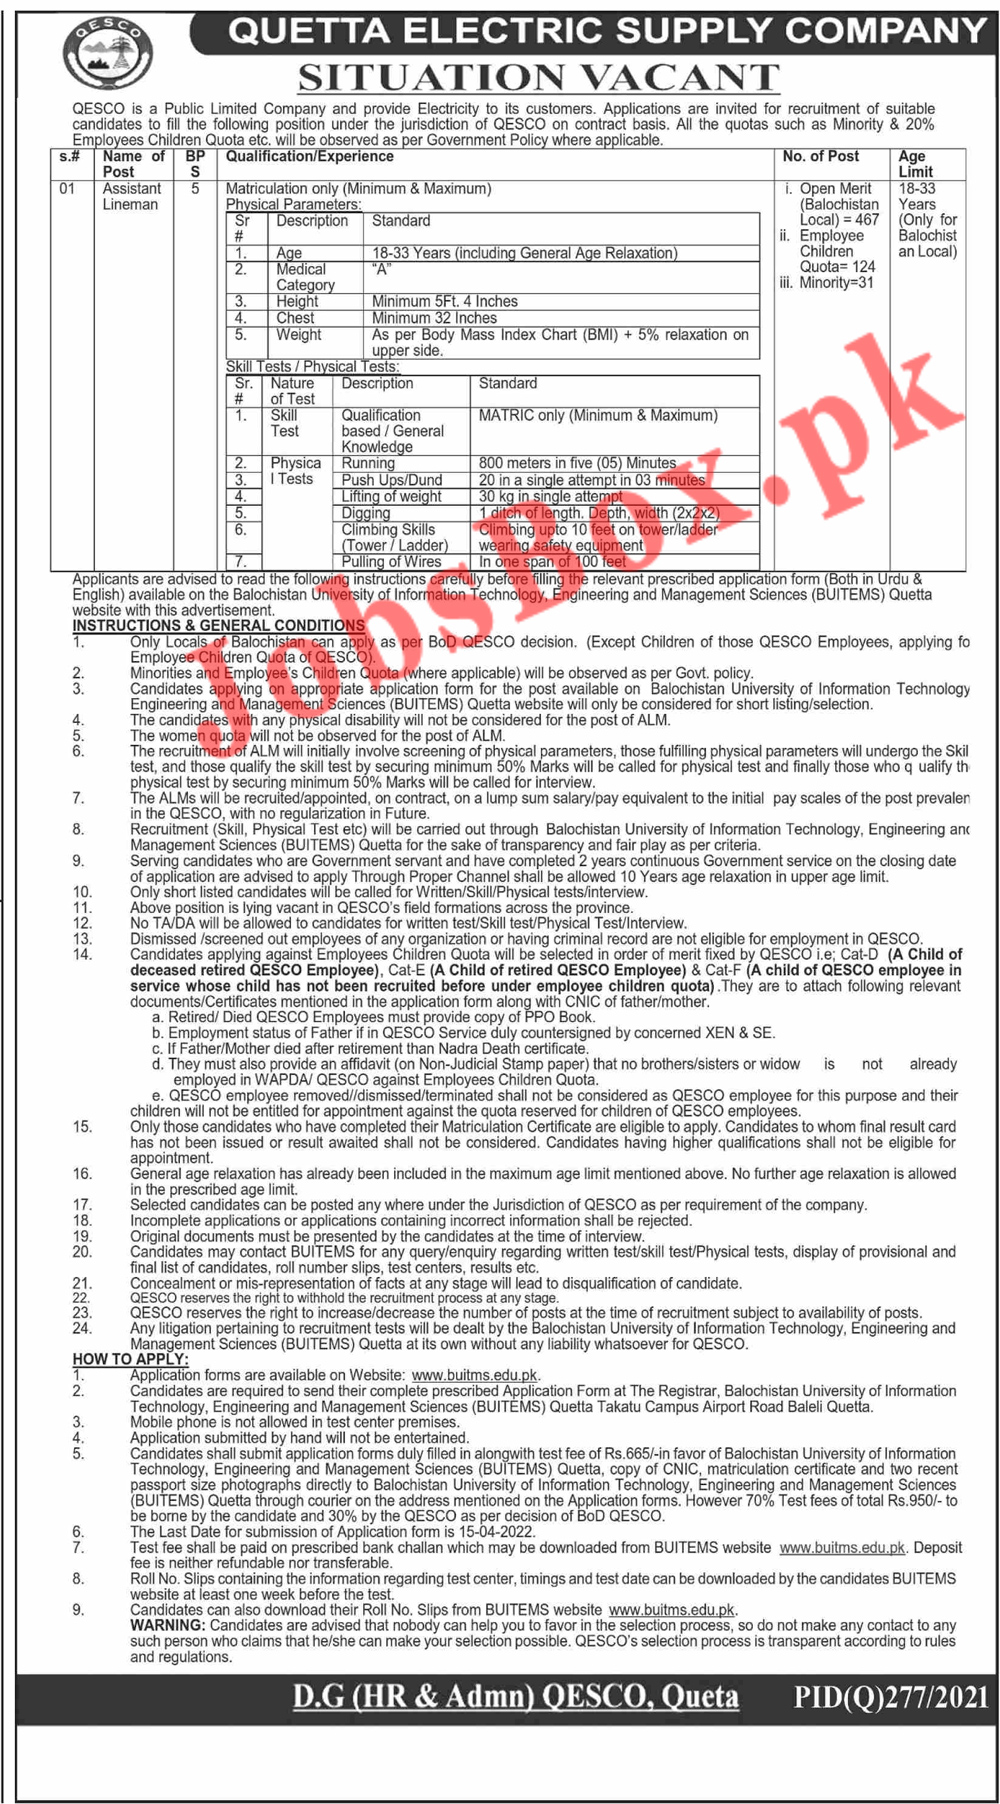 Assistant Lineman ALM Jobs 2022 in QESCO - Application Form